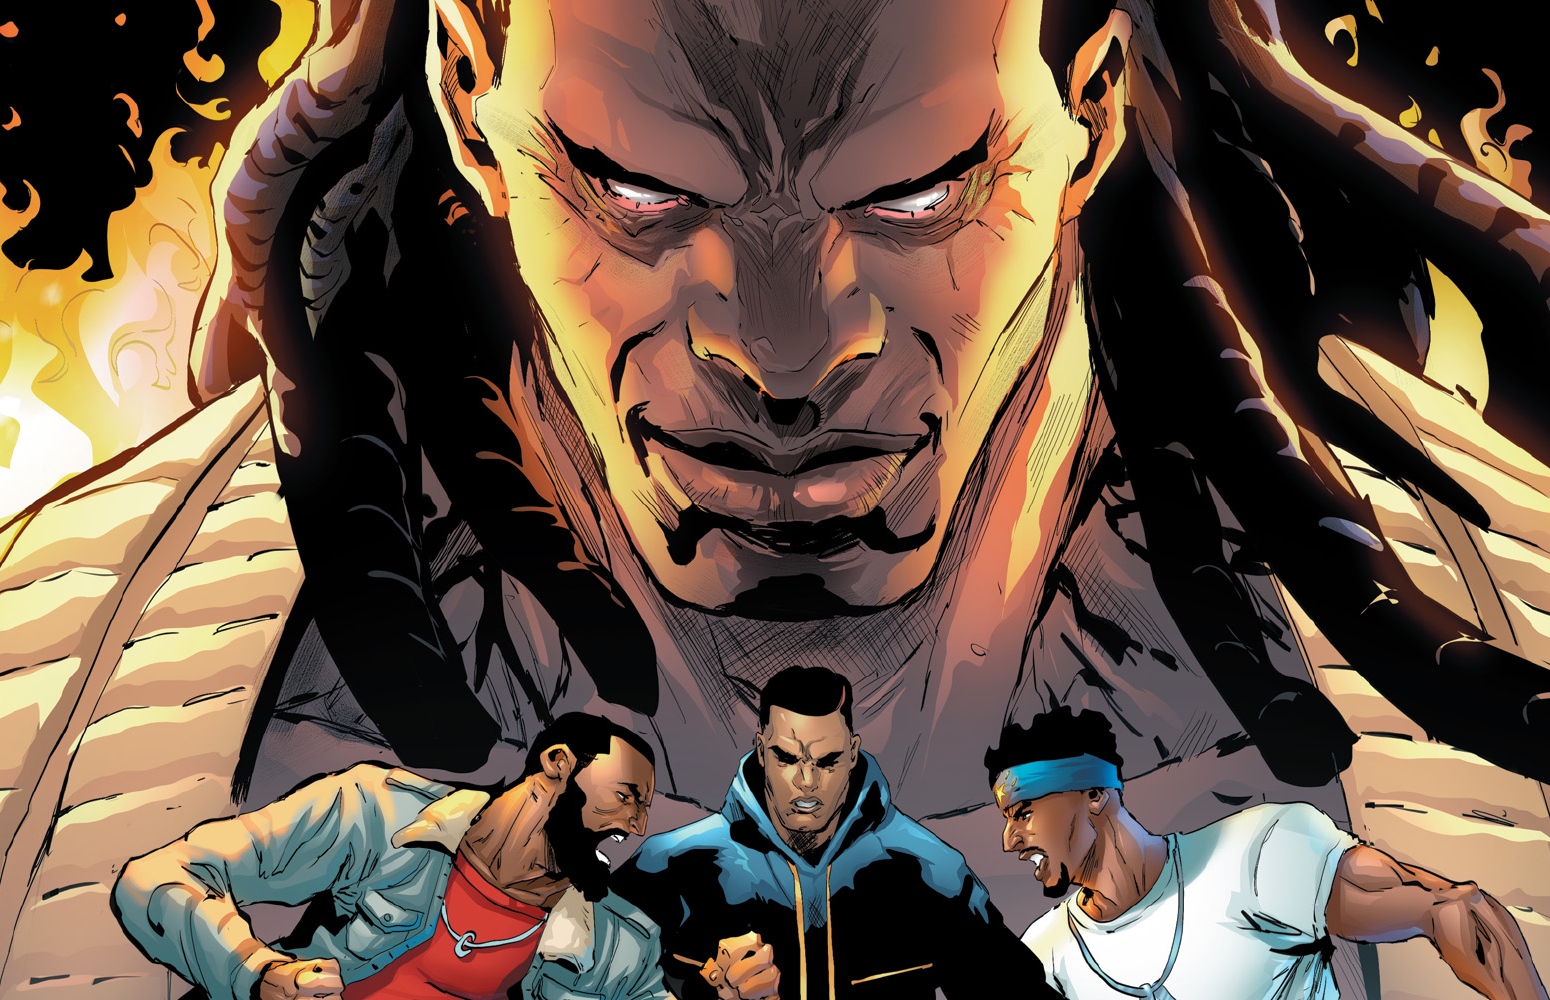 Geoff Thorne talks new politics, nostalgia, and violence in 'Blood Syndicate'